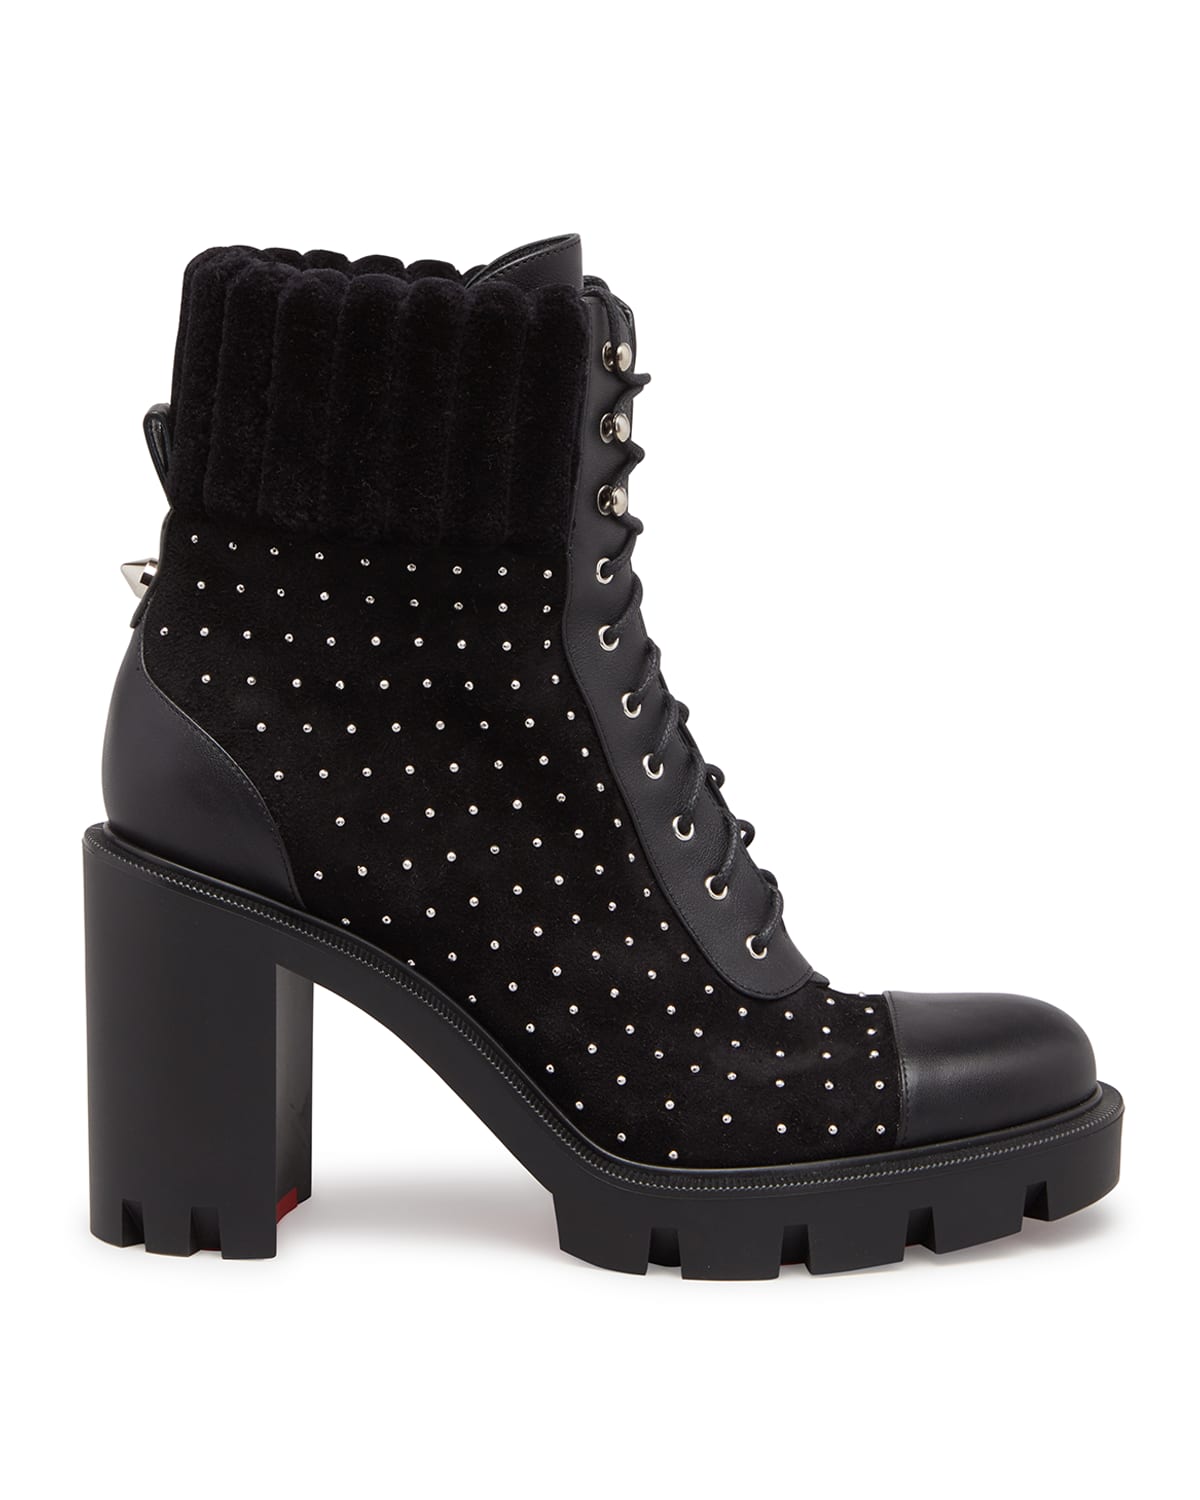 Dakita Studded Suede Red Sole Booties